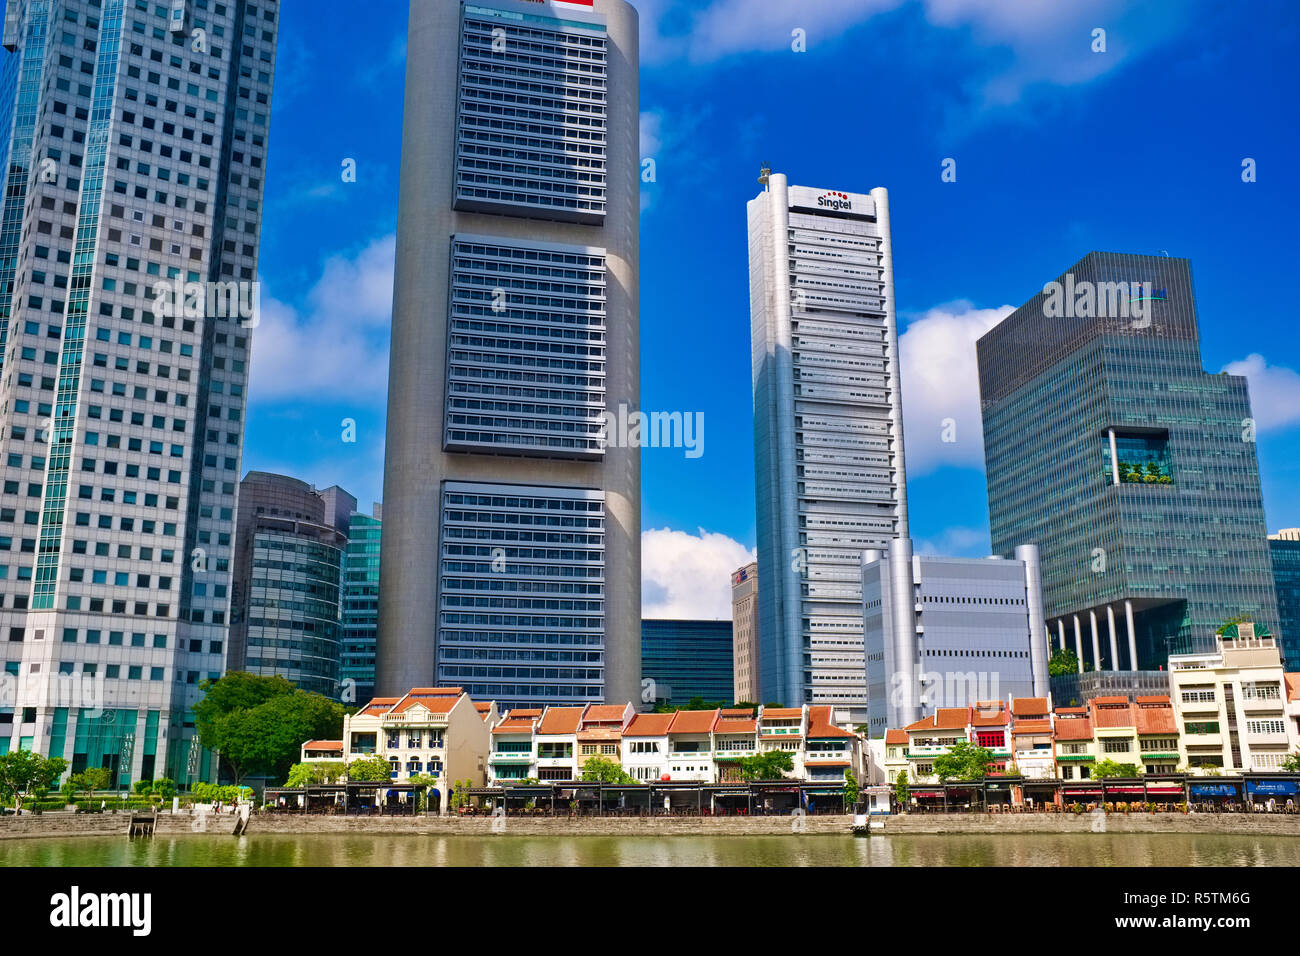 The old warehouses of Boat Quay, Singapore, now containing bars and restaurants, contrasting with the modern towers of Singapore's banking district Stock Photo